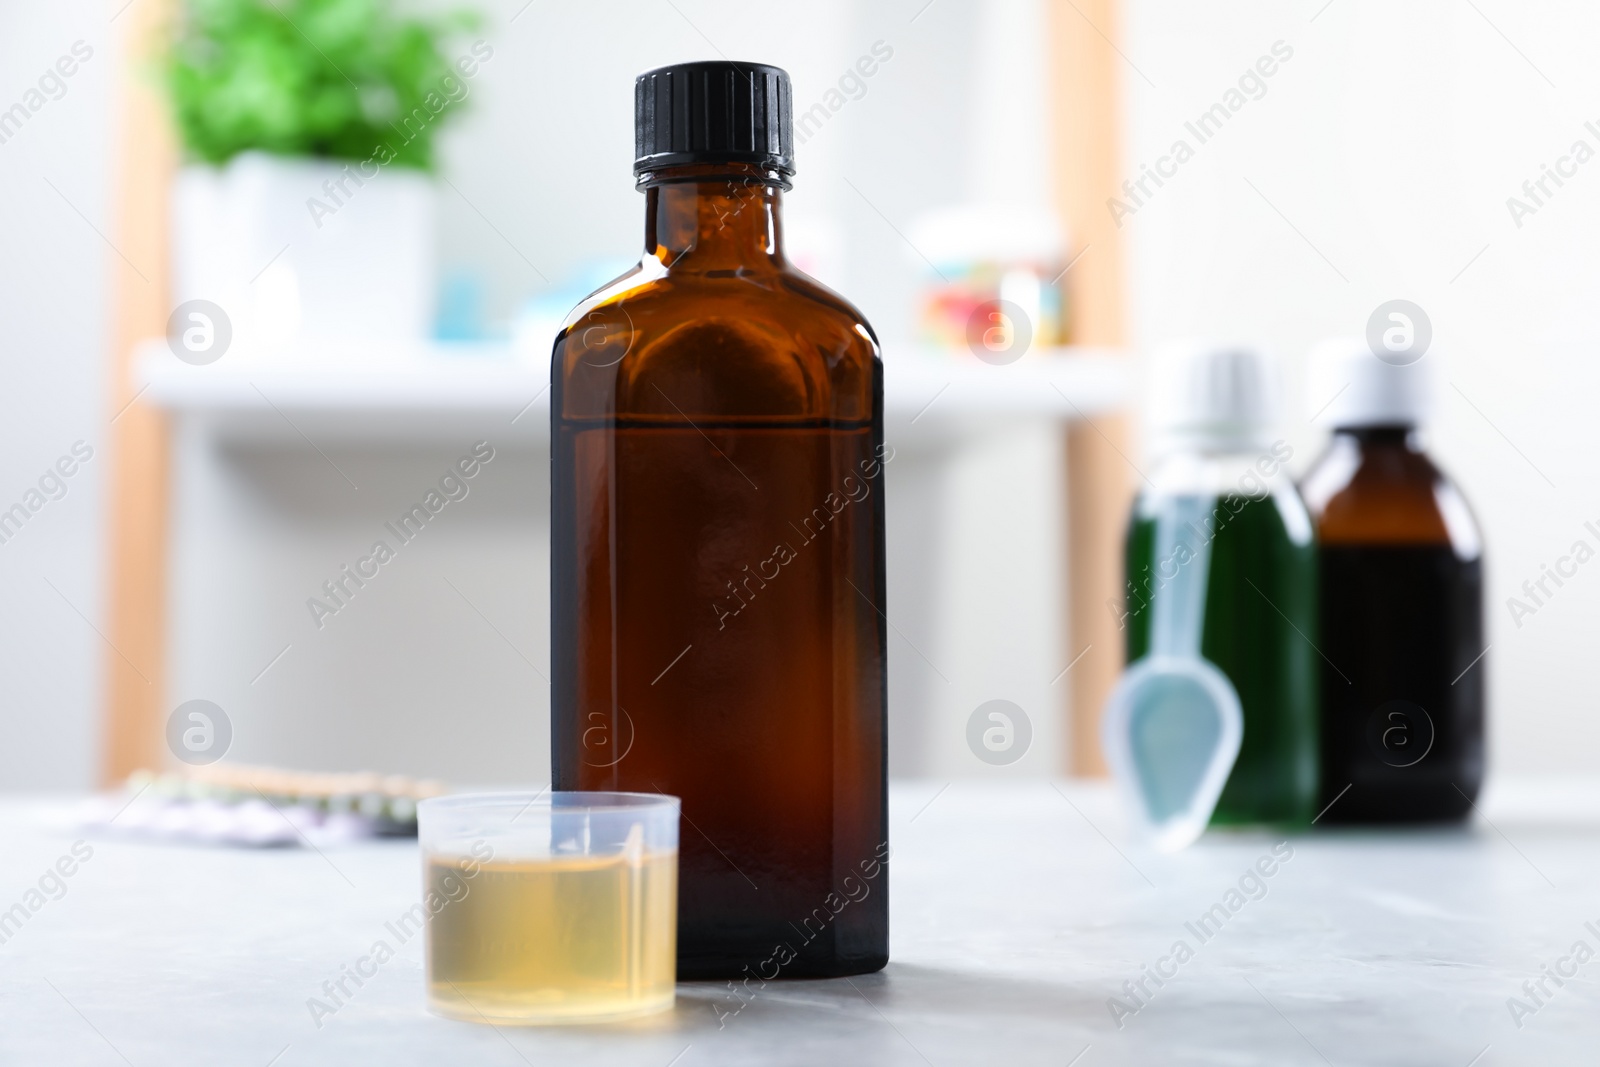 Photo of Bottle of syrup and measuring cup on white table. Cold medicine